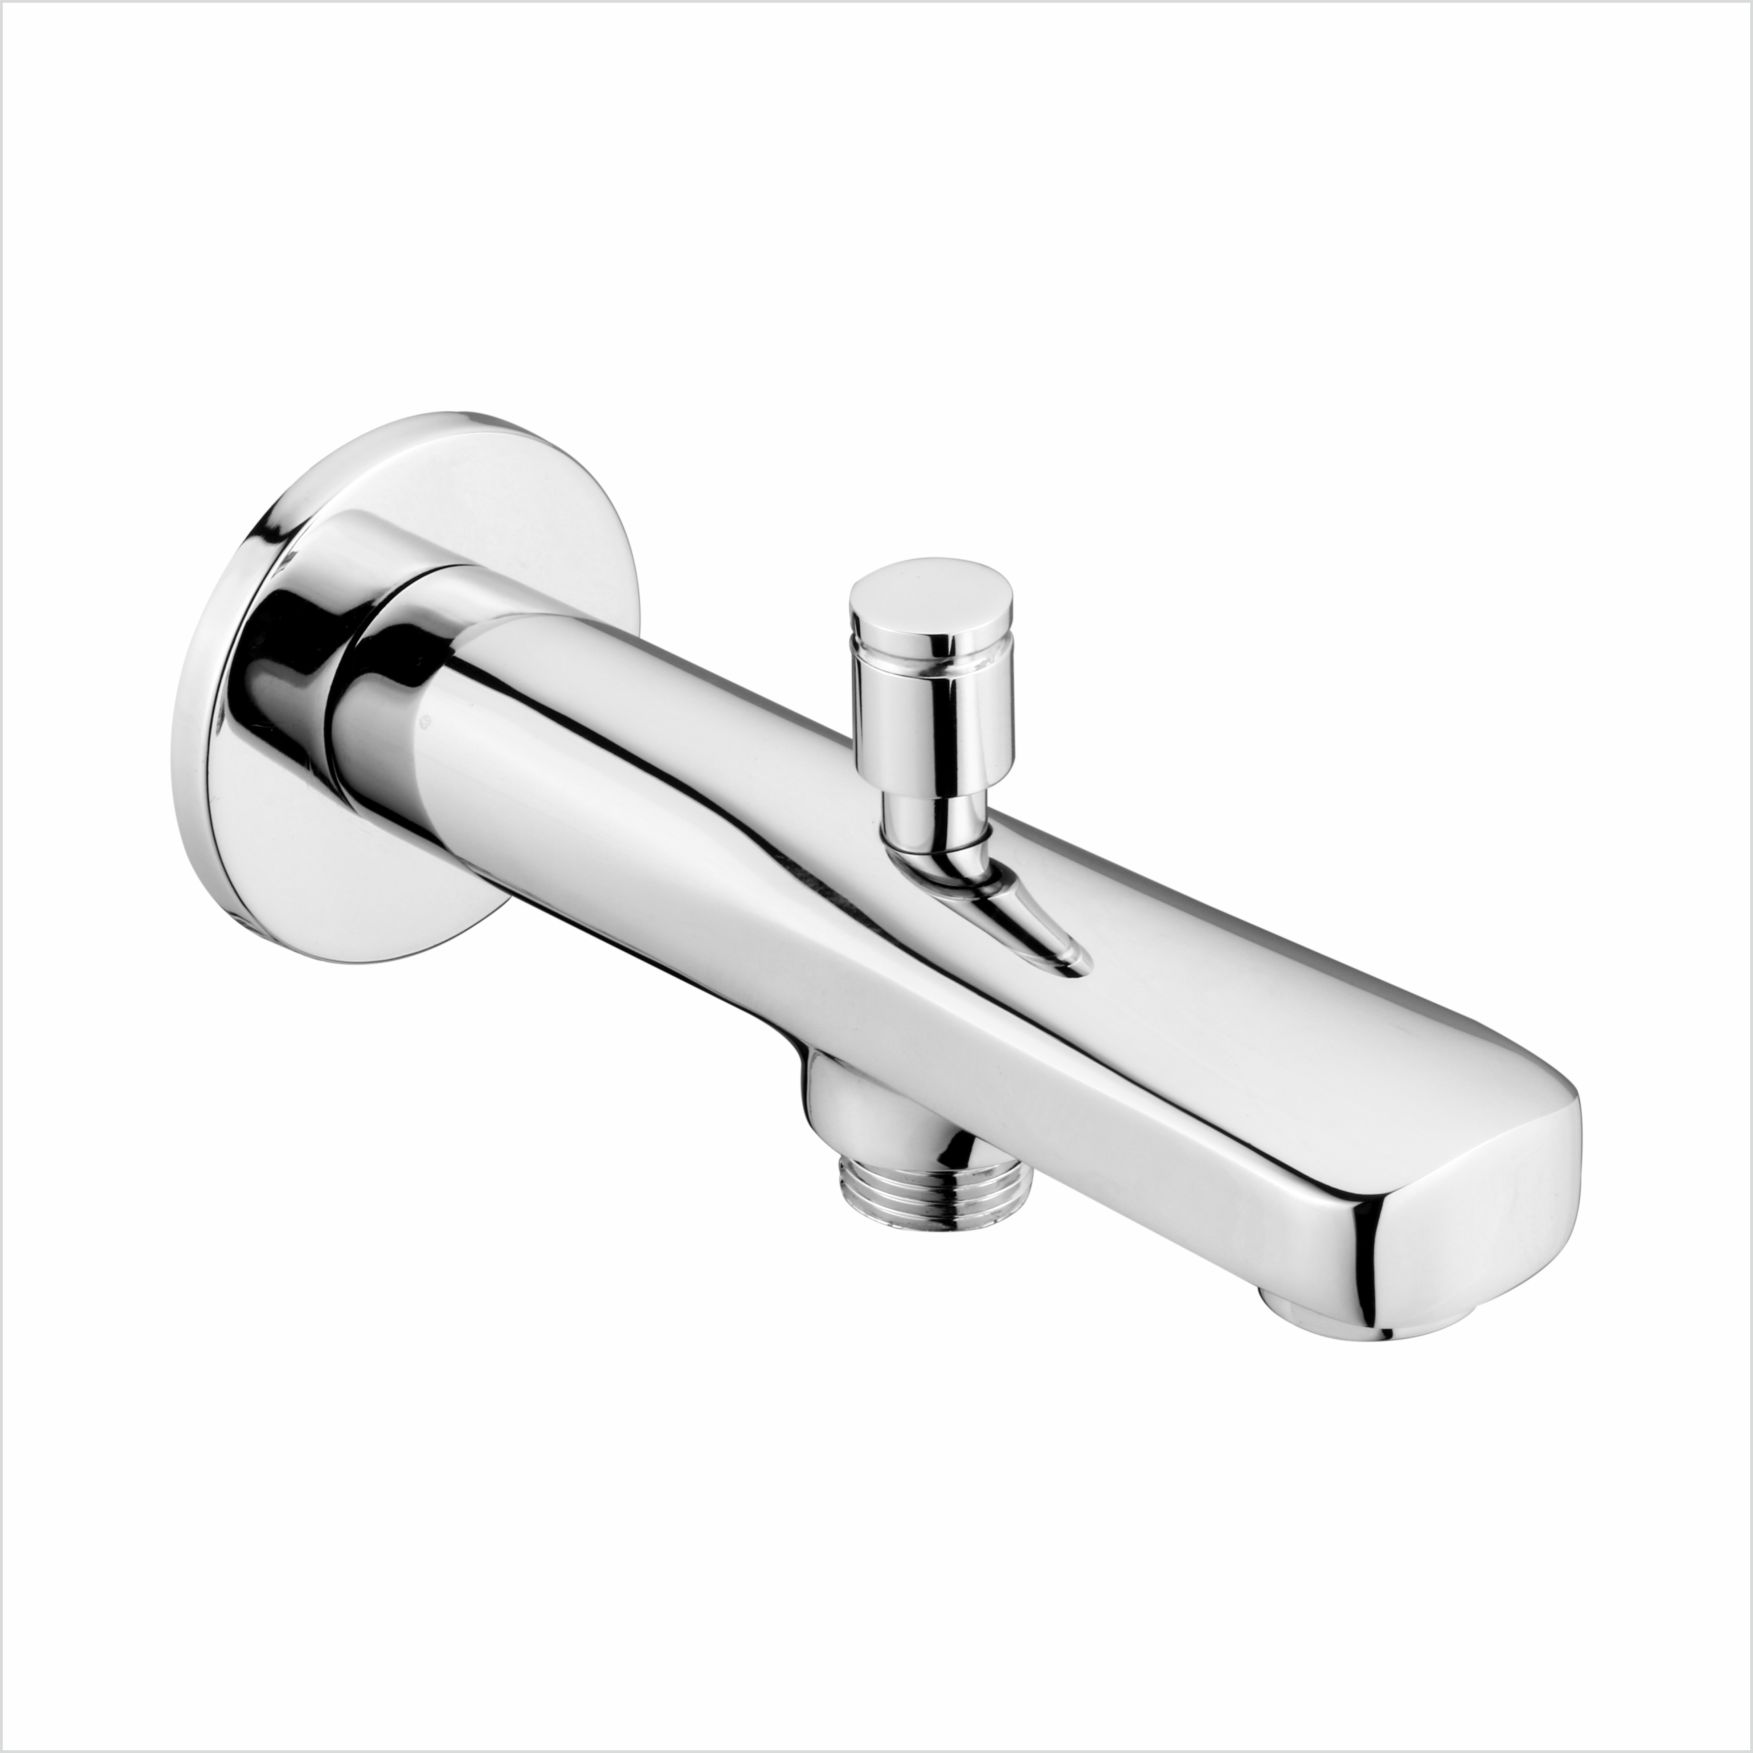 Spout Collection - Bathroom Fittings Manufacturer Company | Orio